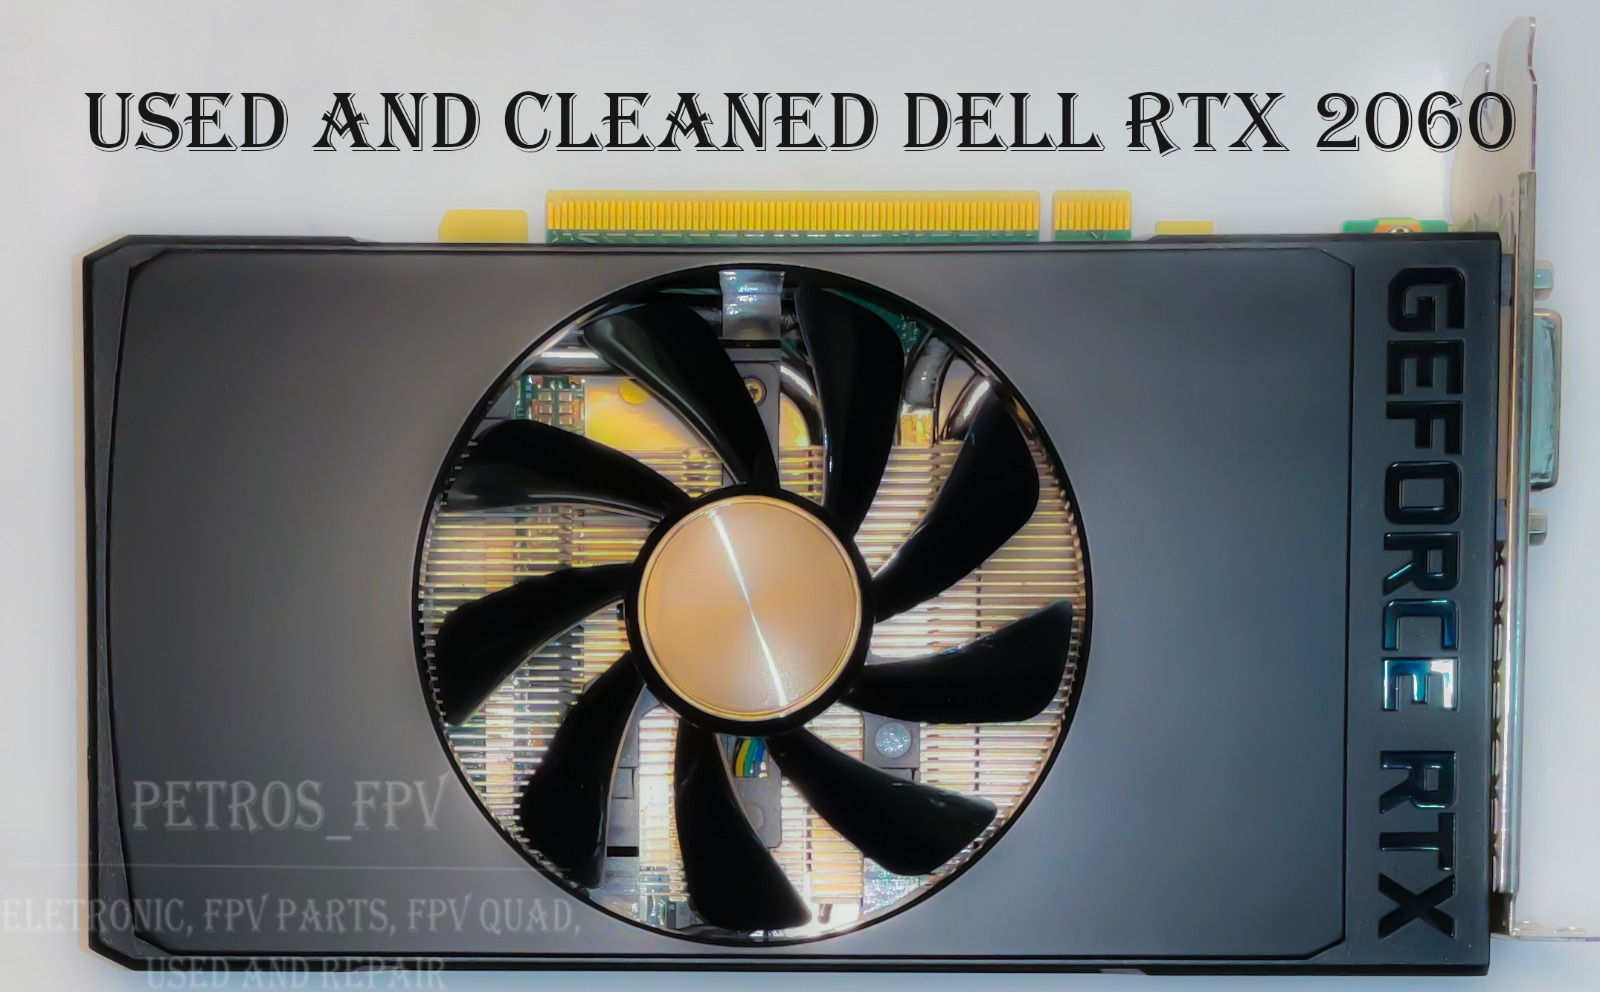 USED DELL RTX 2060 Graphic Card TU106 6 GB GDDR6 1365MHz (DEEP CLEANED) 